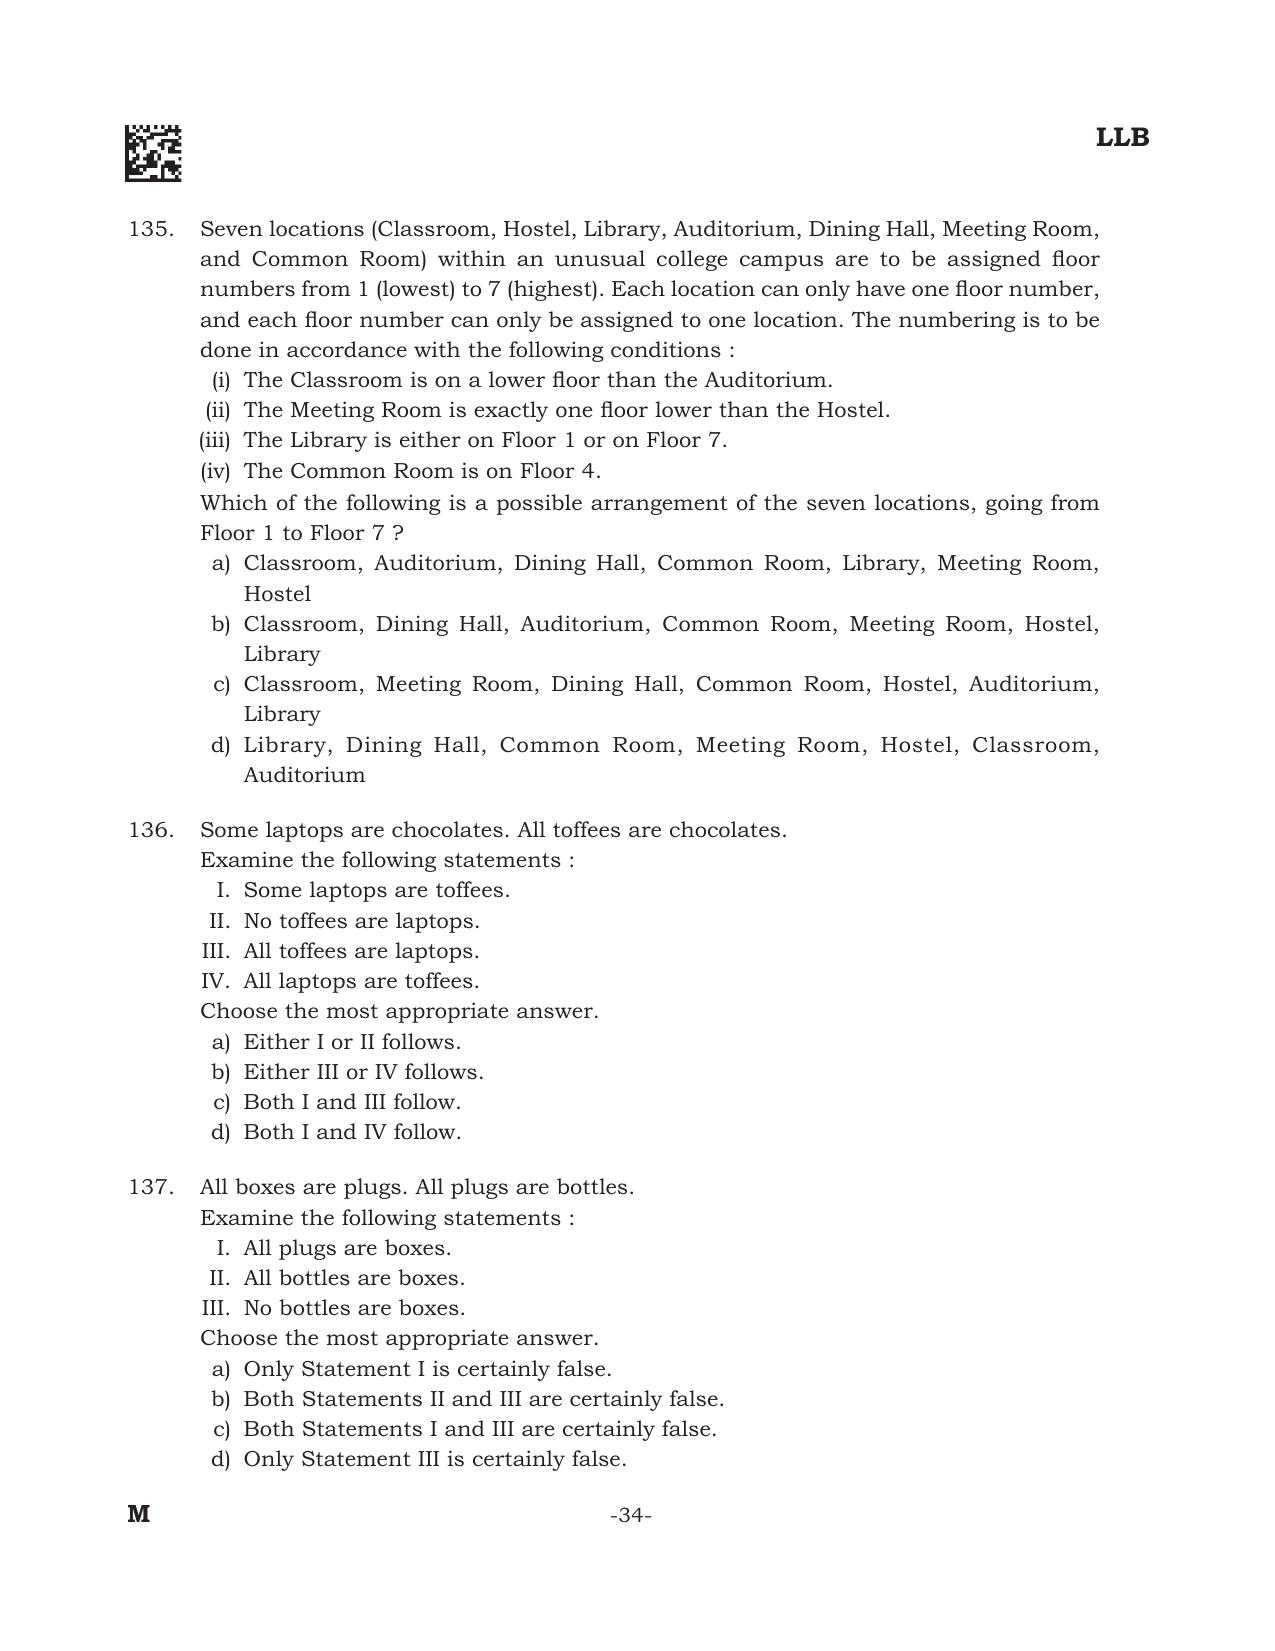 AILET 2022 Question Paper for BA LLB - Page 34